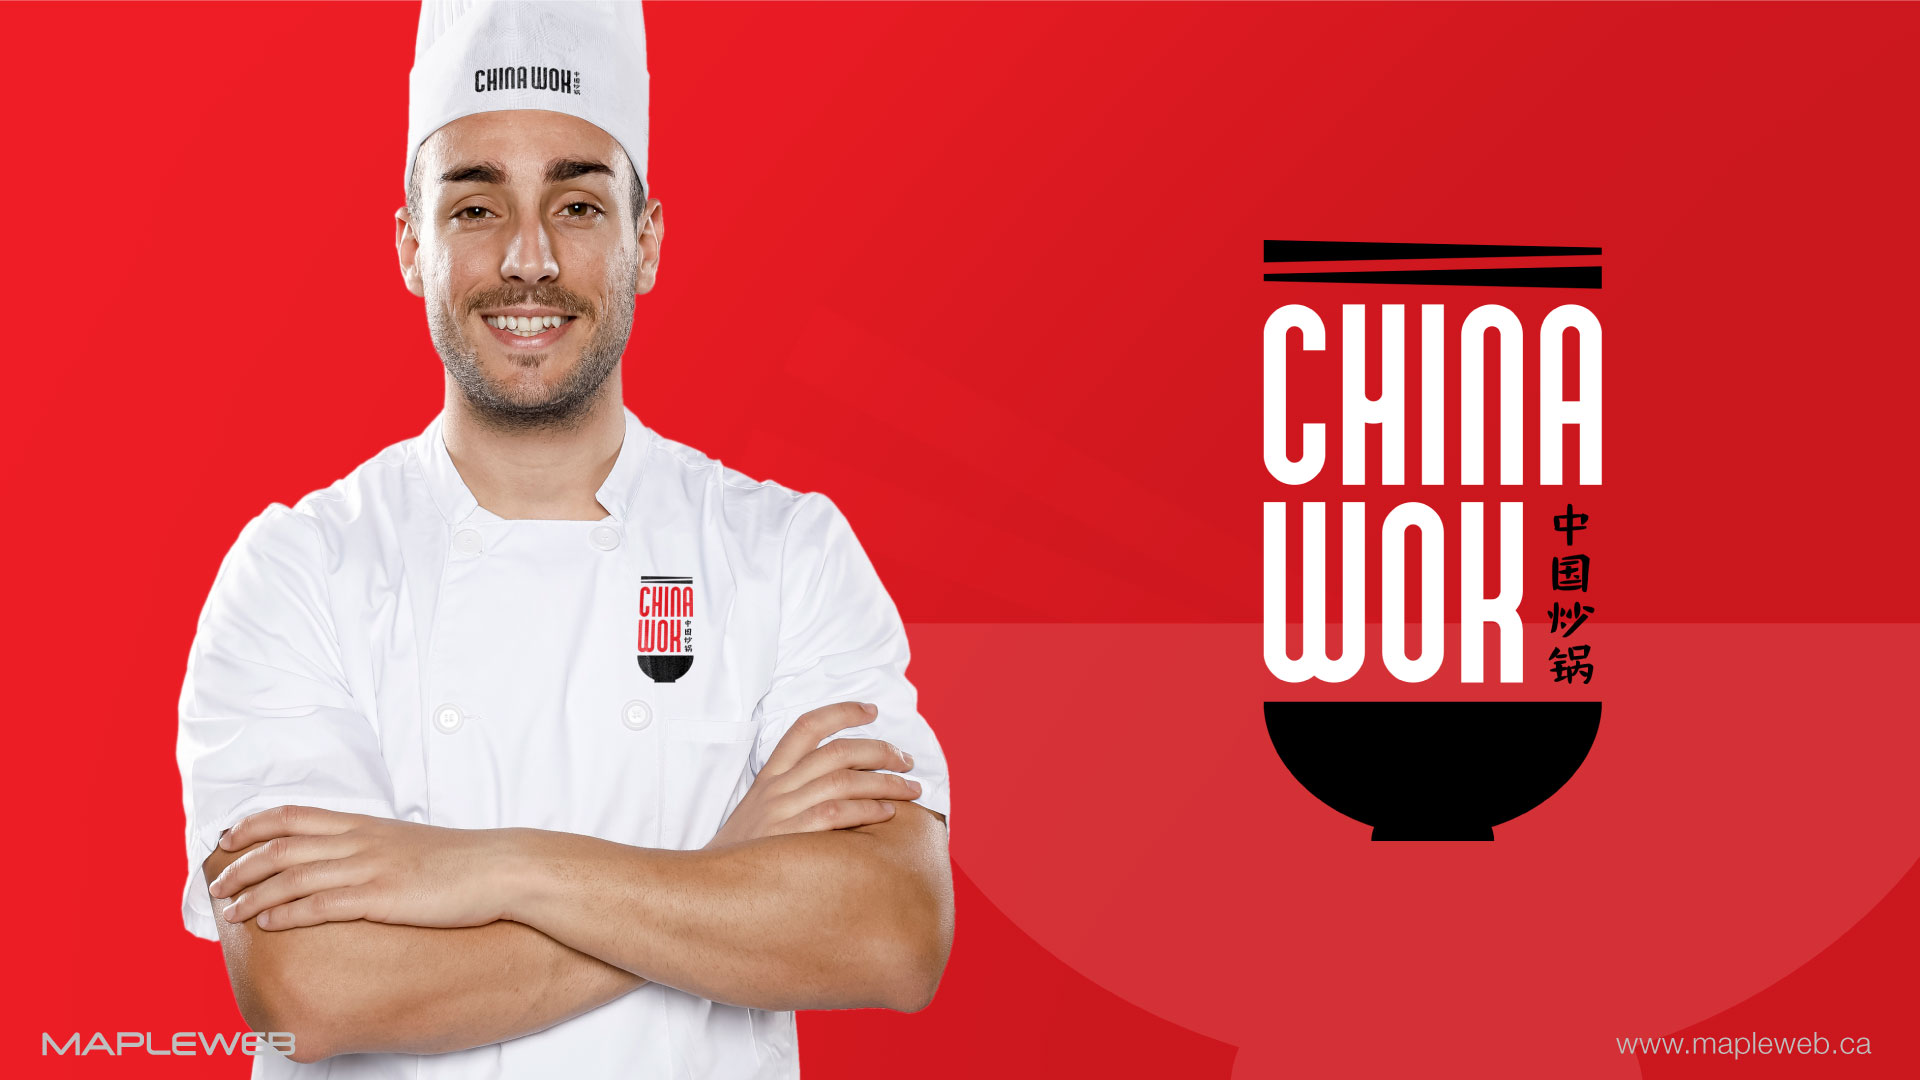 china-wok-brand-logo-design-by-mapleweb-vancouver-canada-chef-white-cooking-dress-&-hat-mock